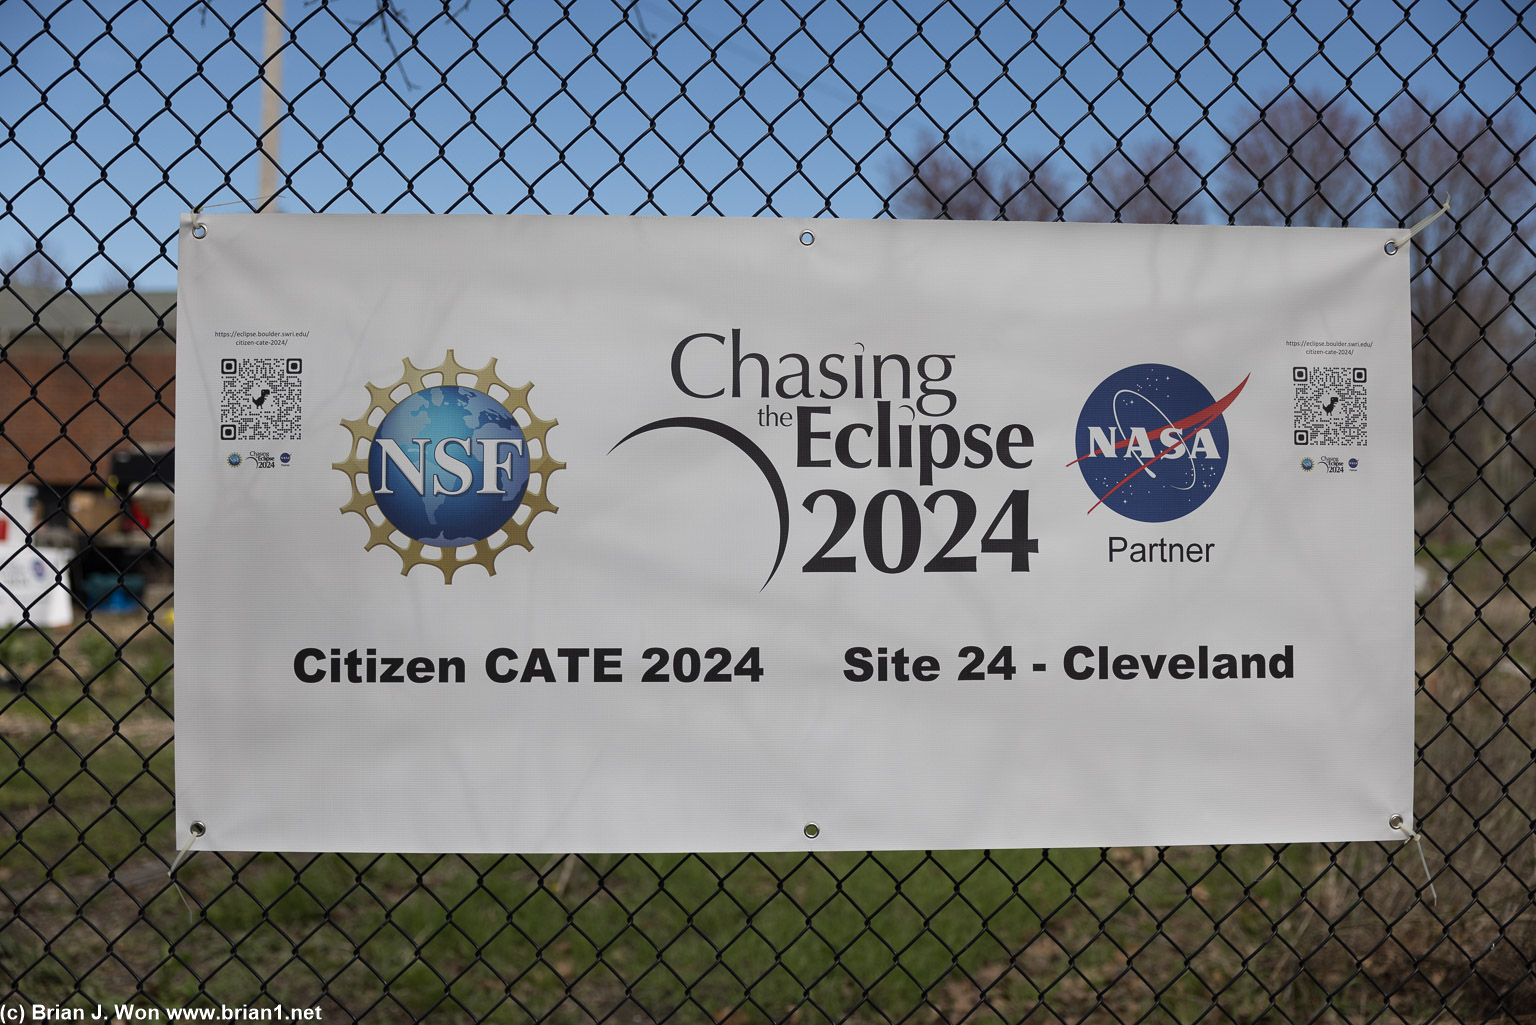 NASA Chasing the Eclipse Site 24 - Cleveland.